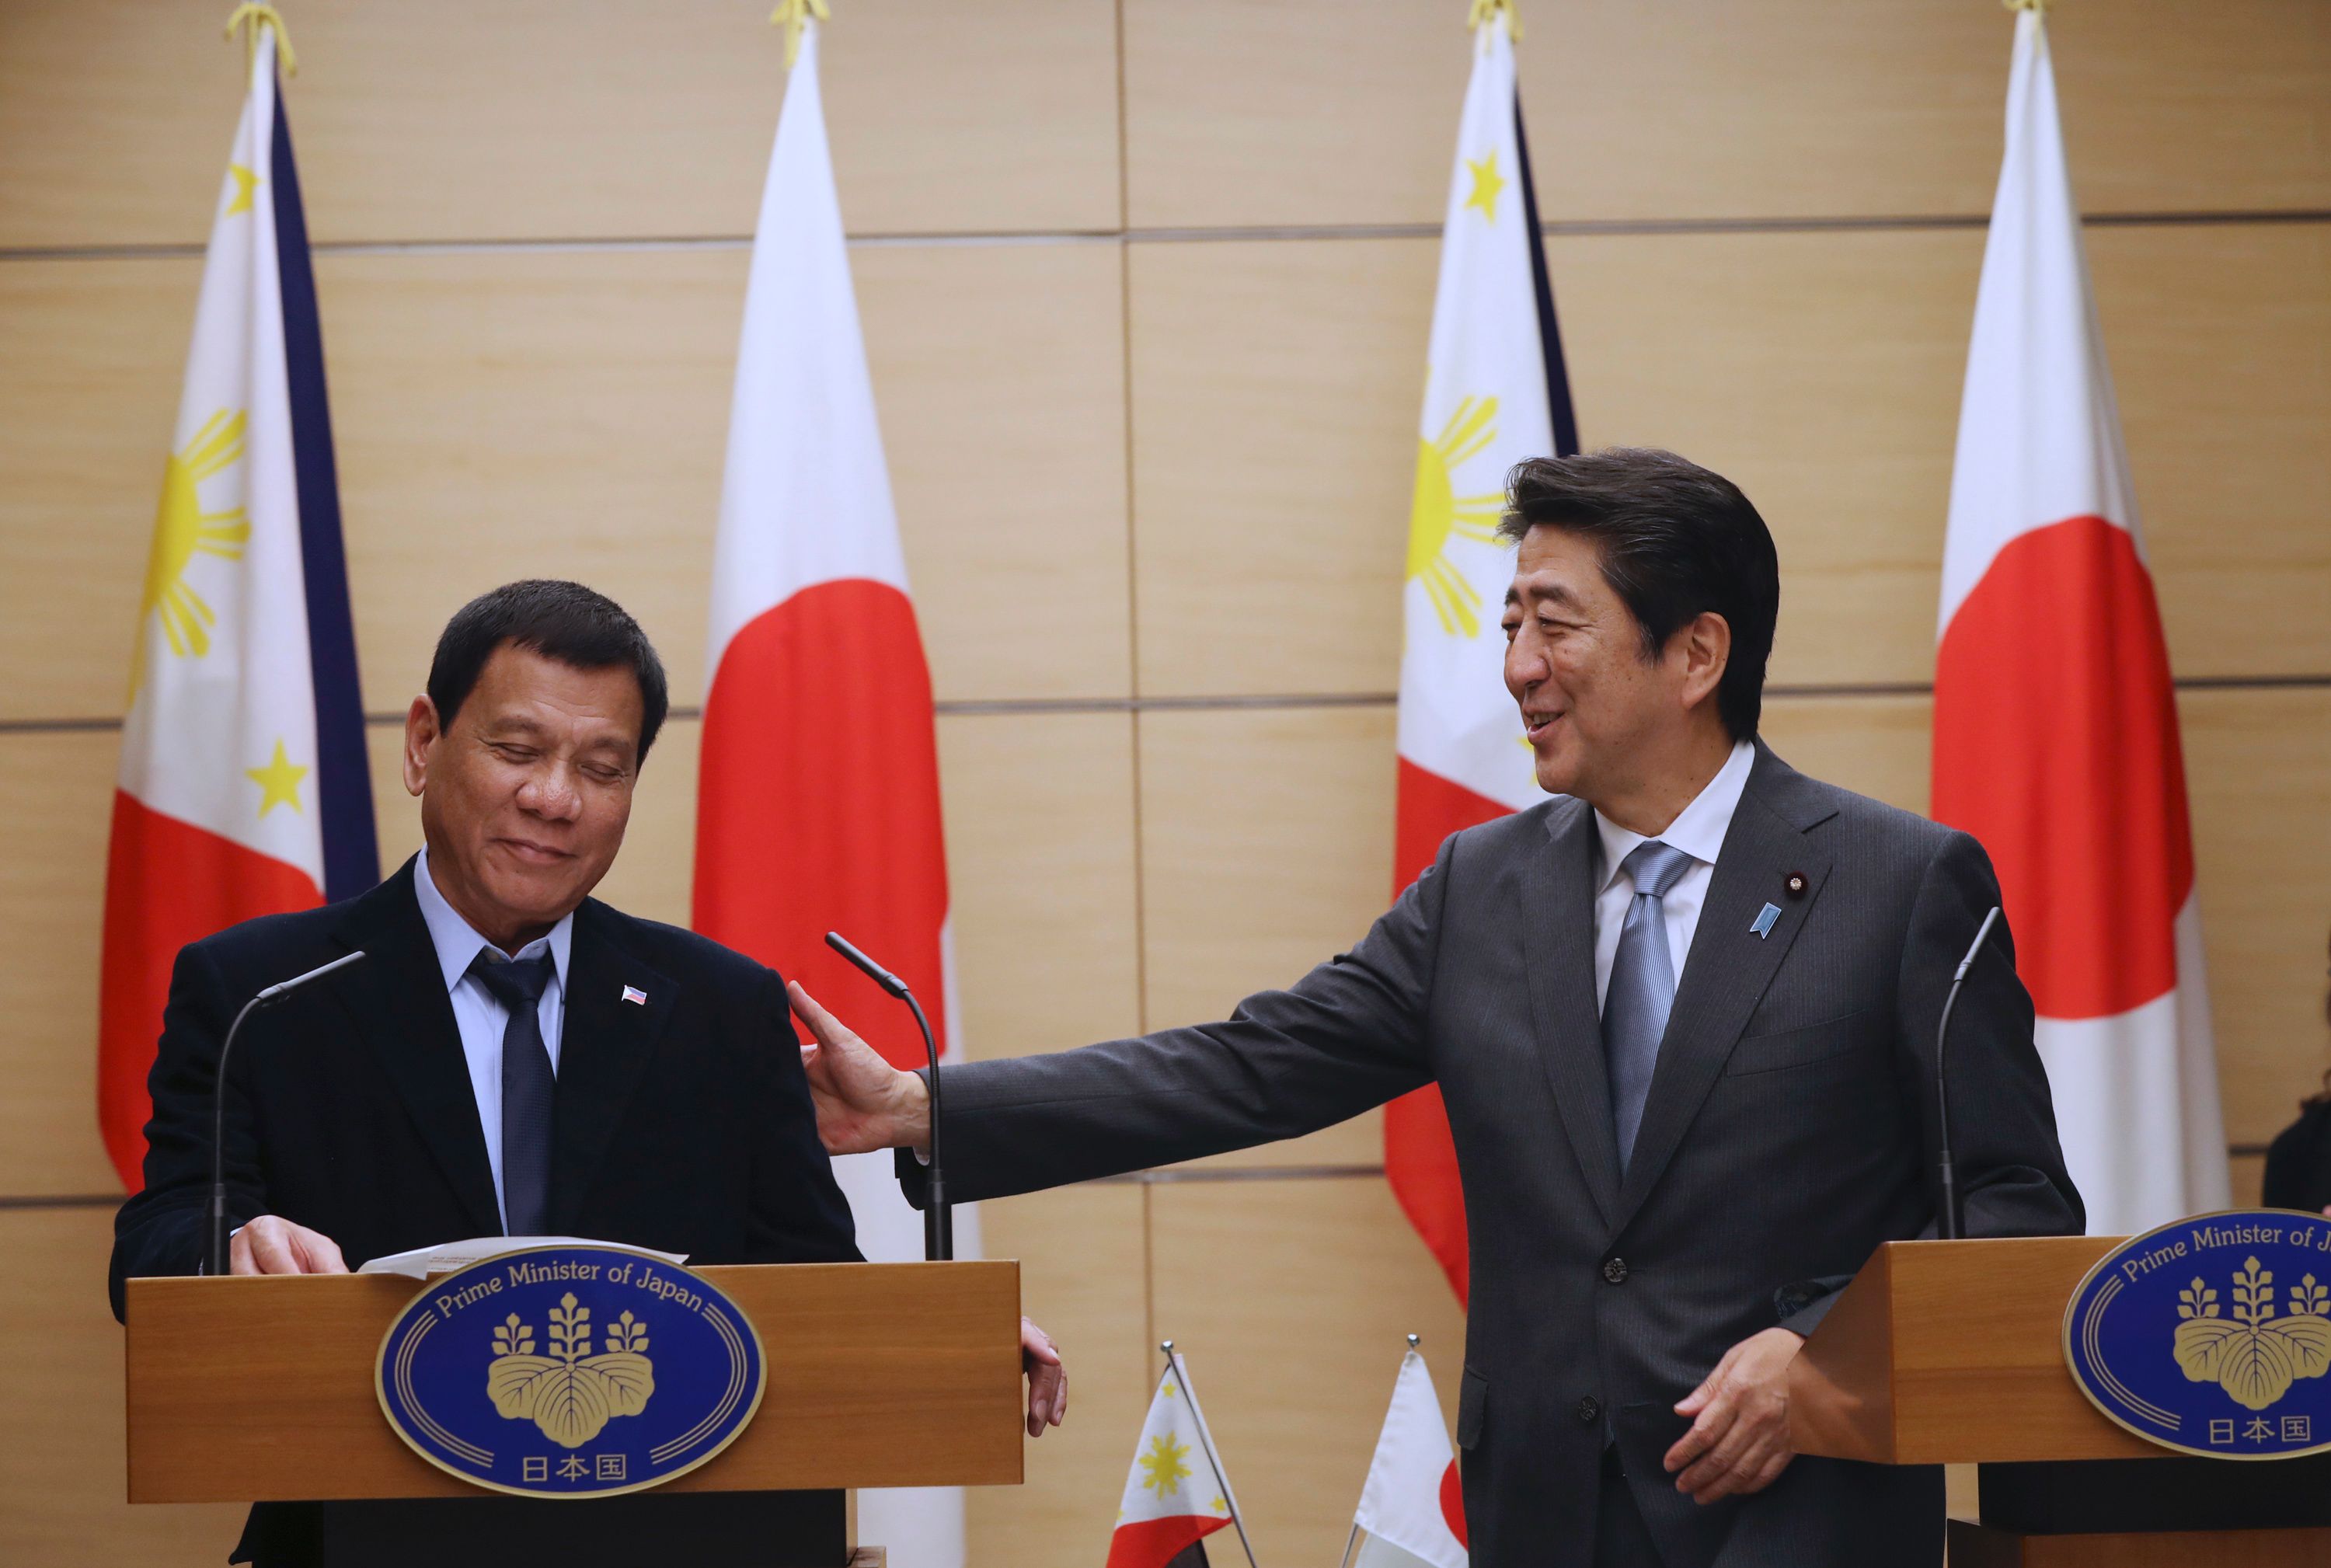 Bosom buddies? Japan and the Philippines